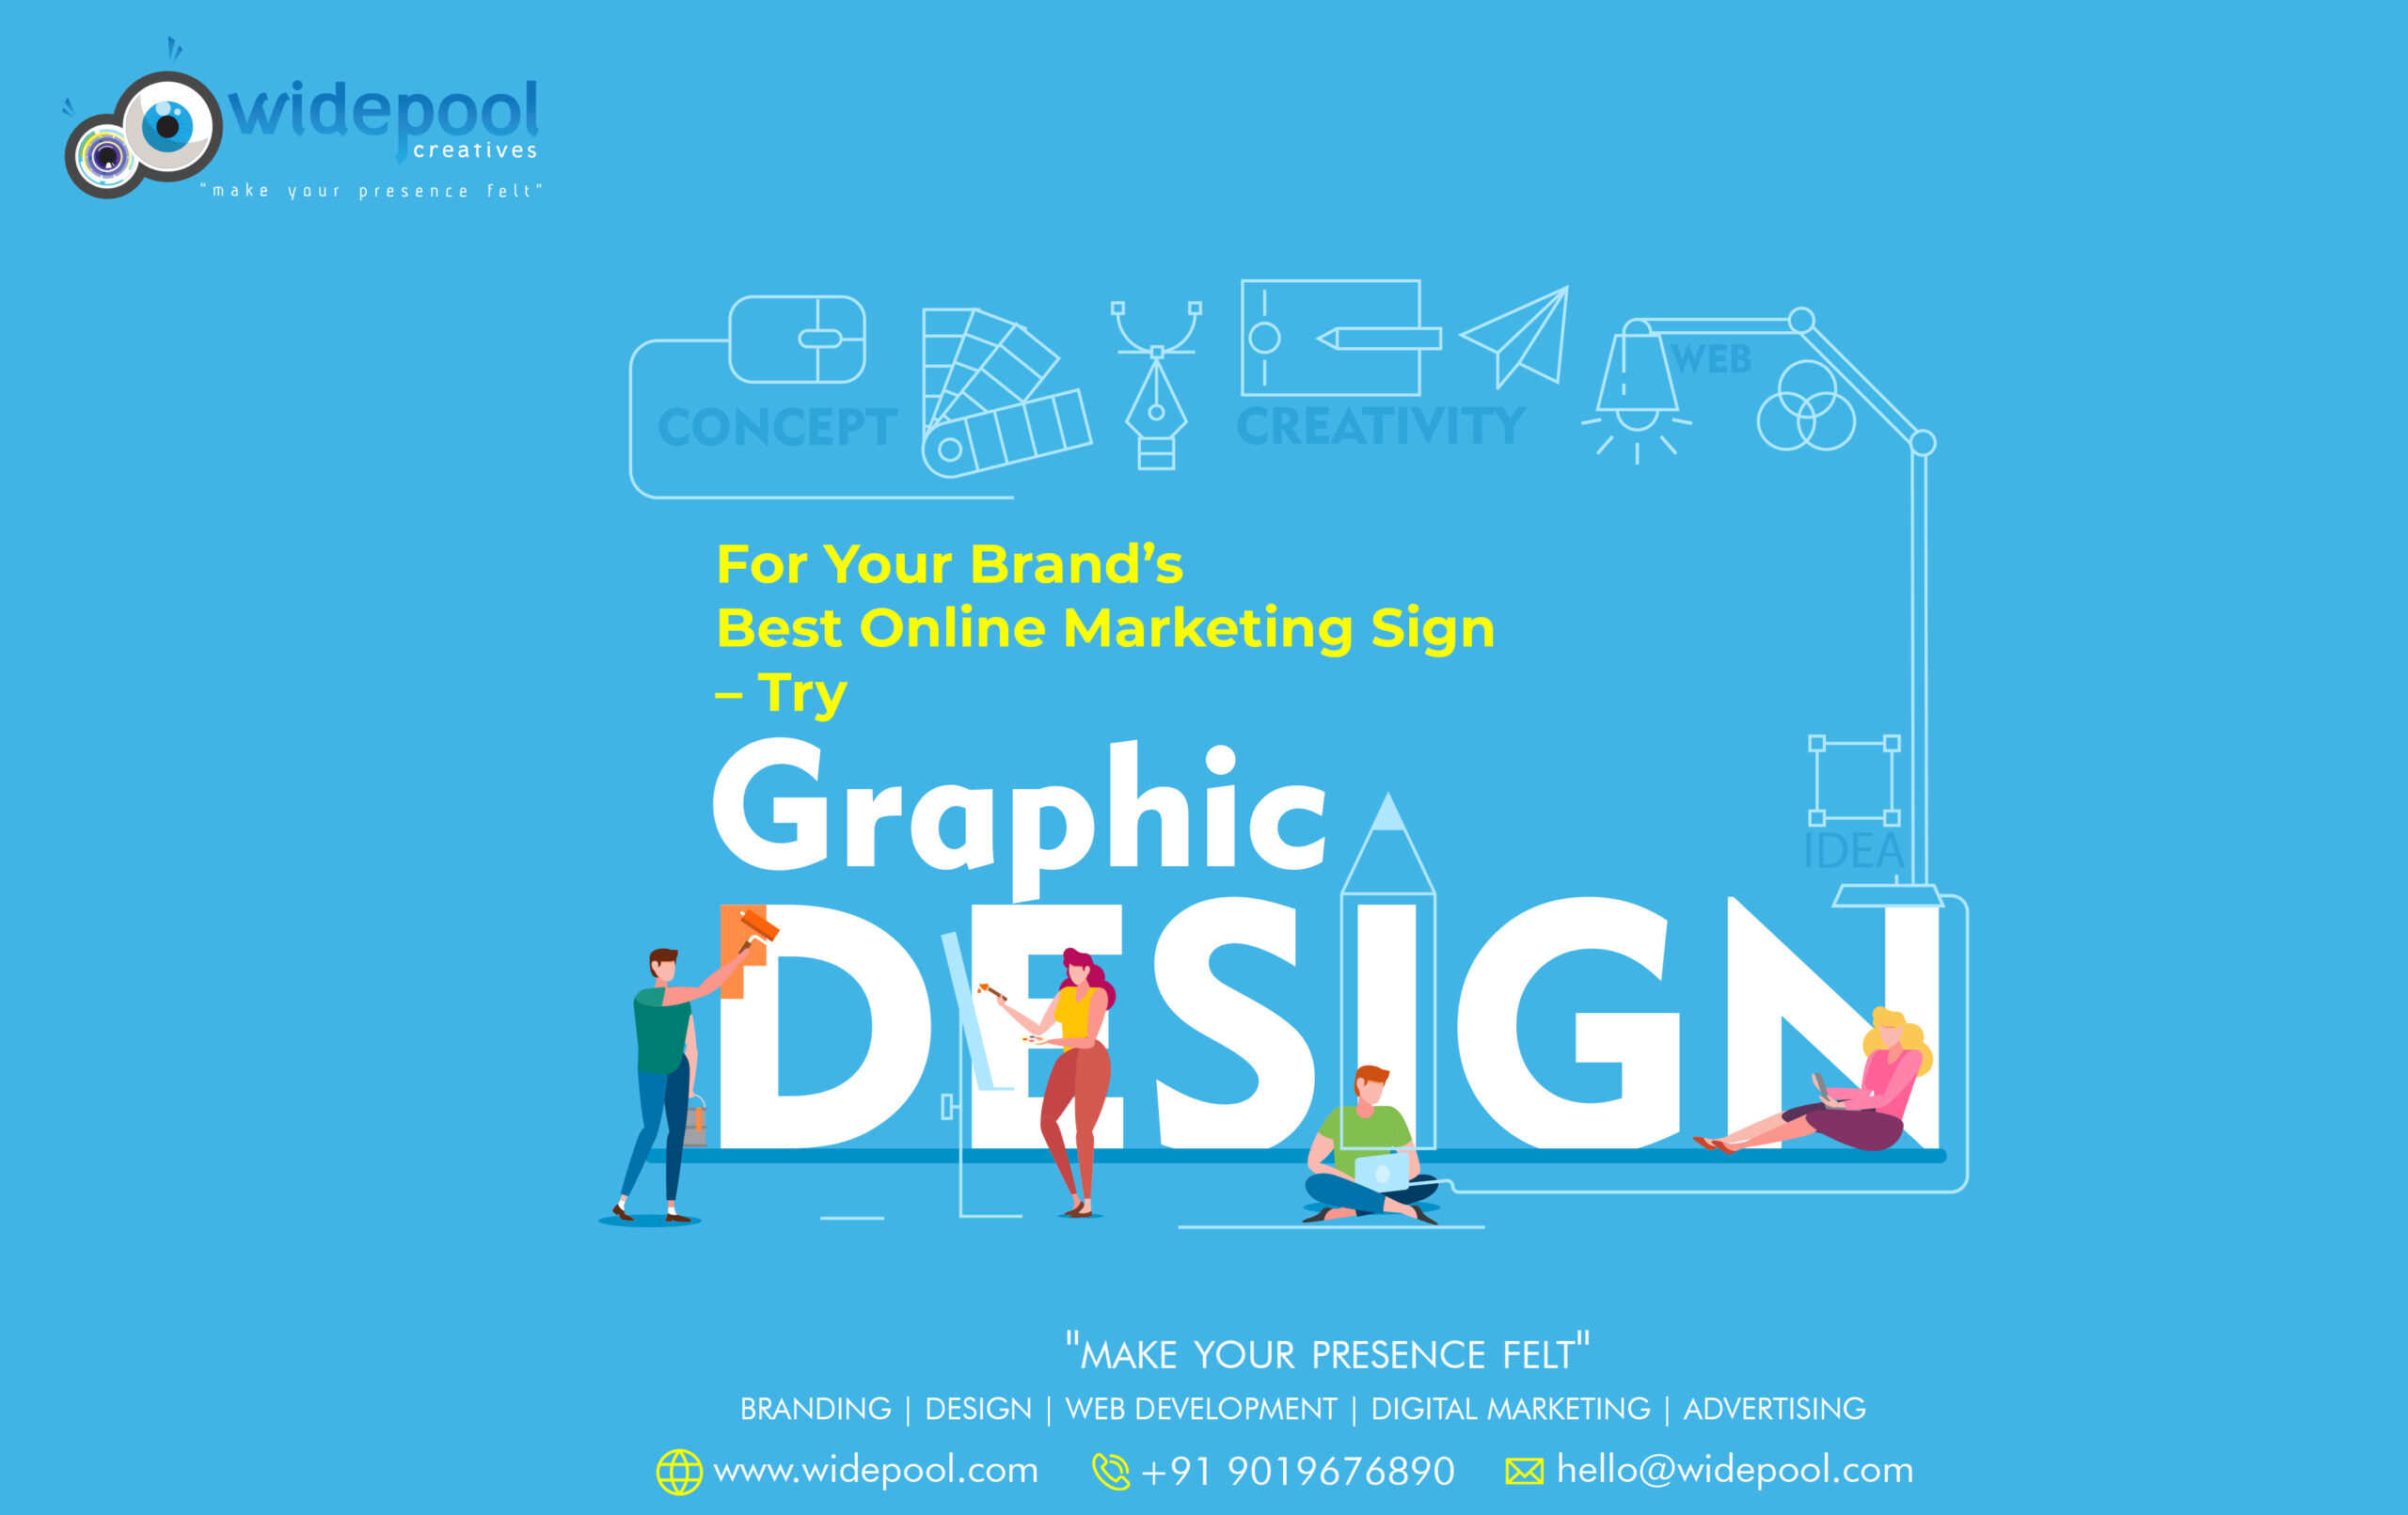 For Your Brand’s Best Online Marketing Sign – Try Graphic Design!